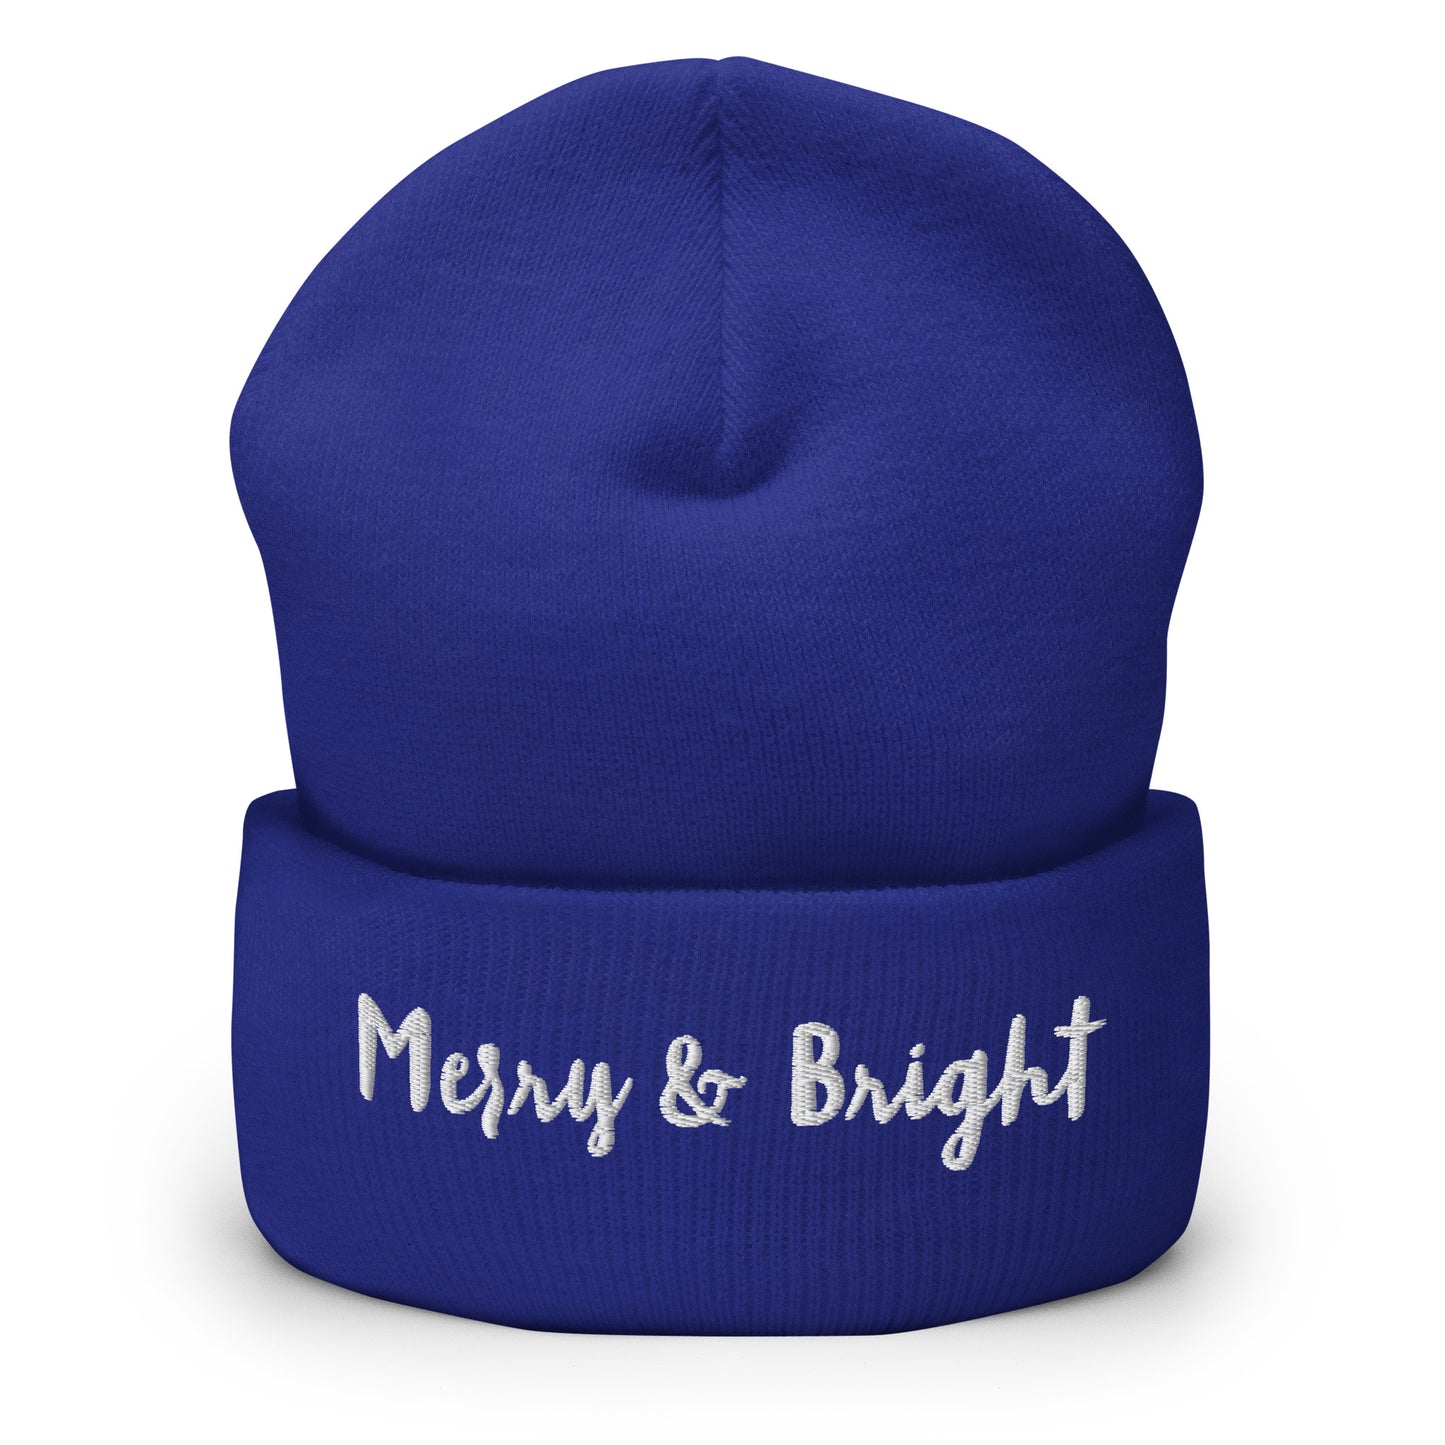 Merry and Bright Stocking Cap